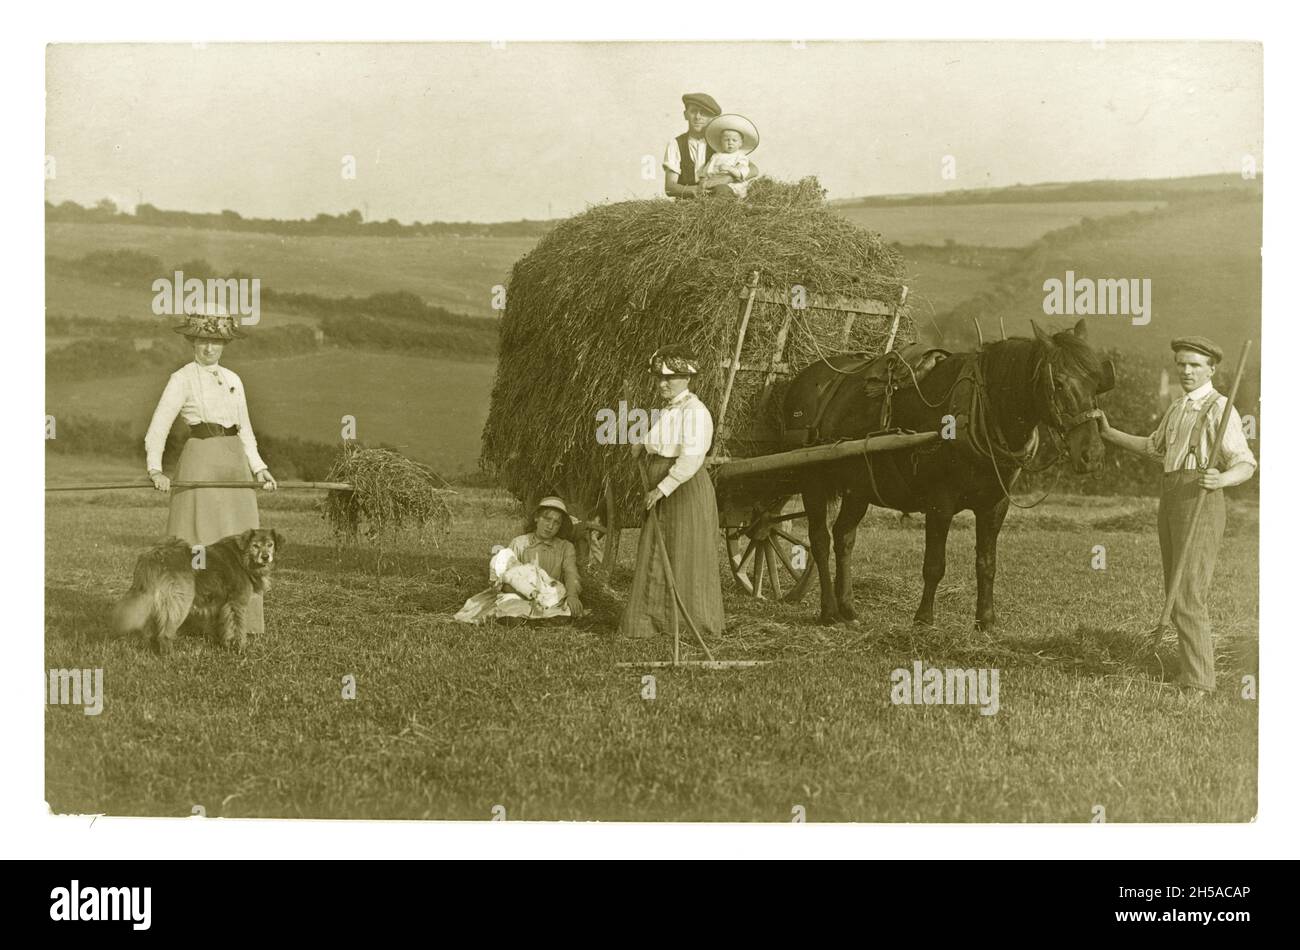 Original early 1900's Edwardian farm greetings postcard of people in a field wearing Sunday Best clothes, bringing in hay, horse and wagon, circa 1901, U.K. Stock Photo